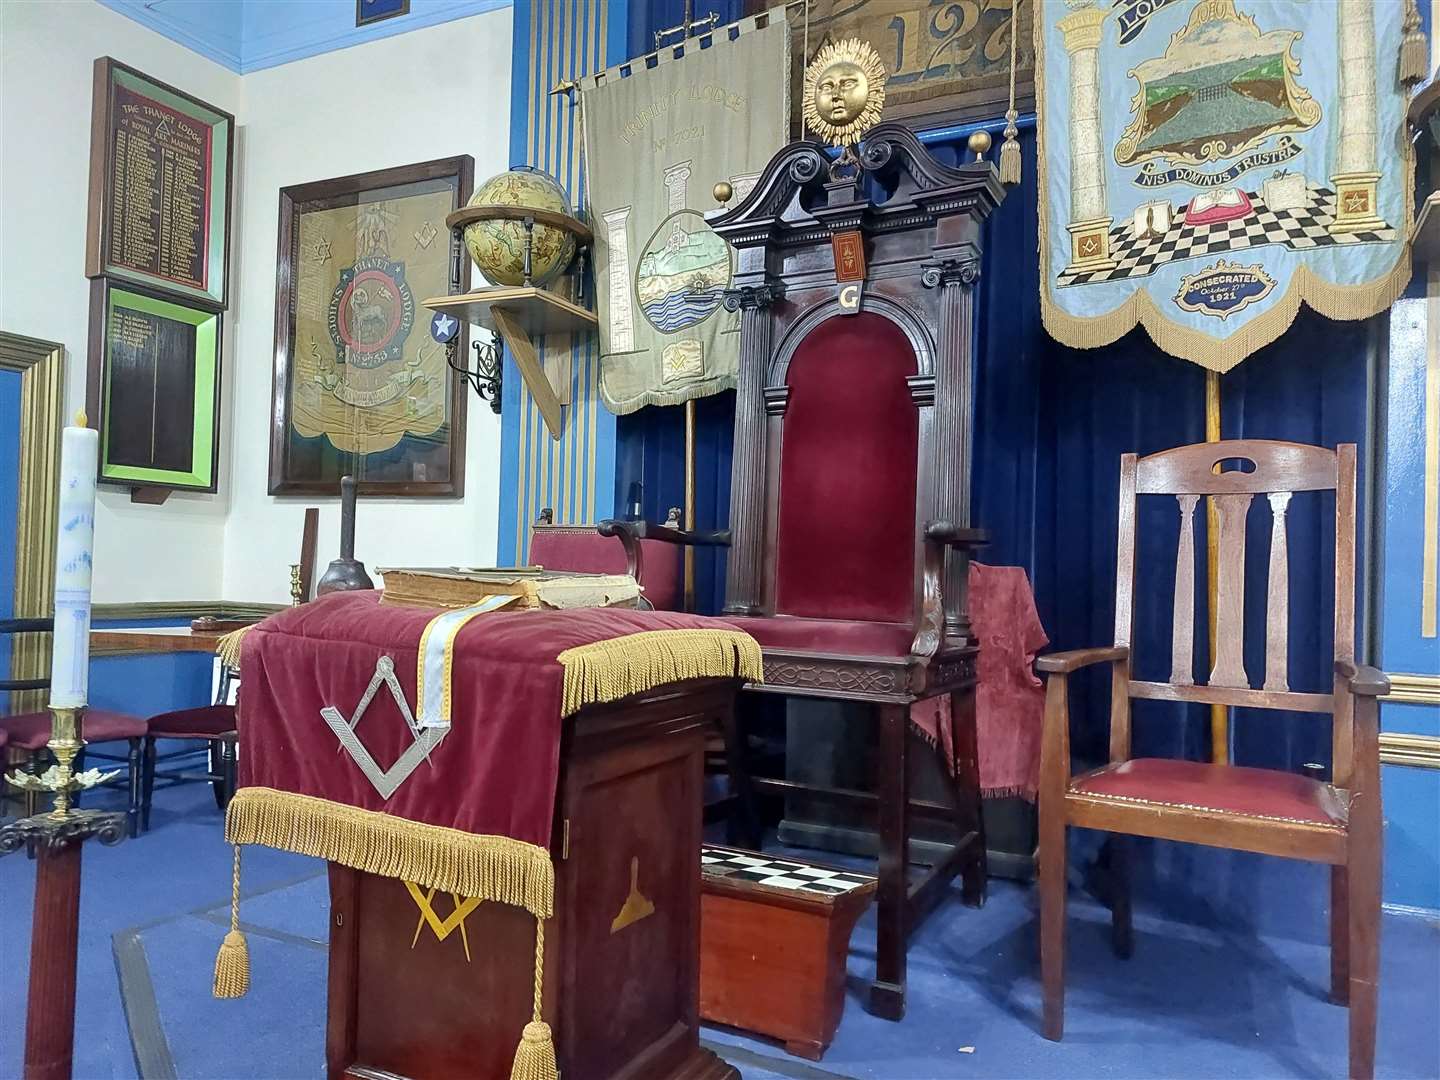 At one end of the hall sits a raised, throne-like chair